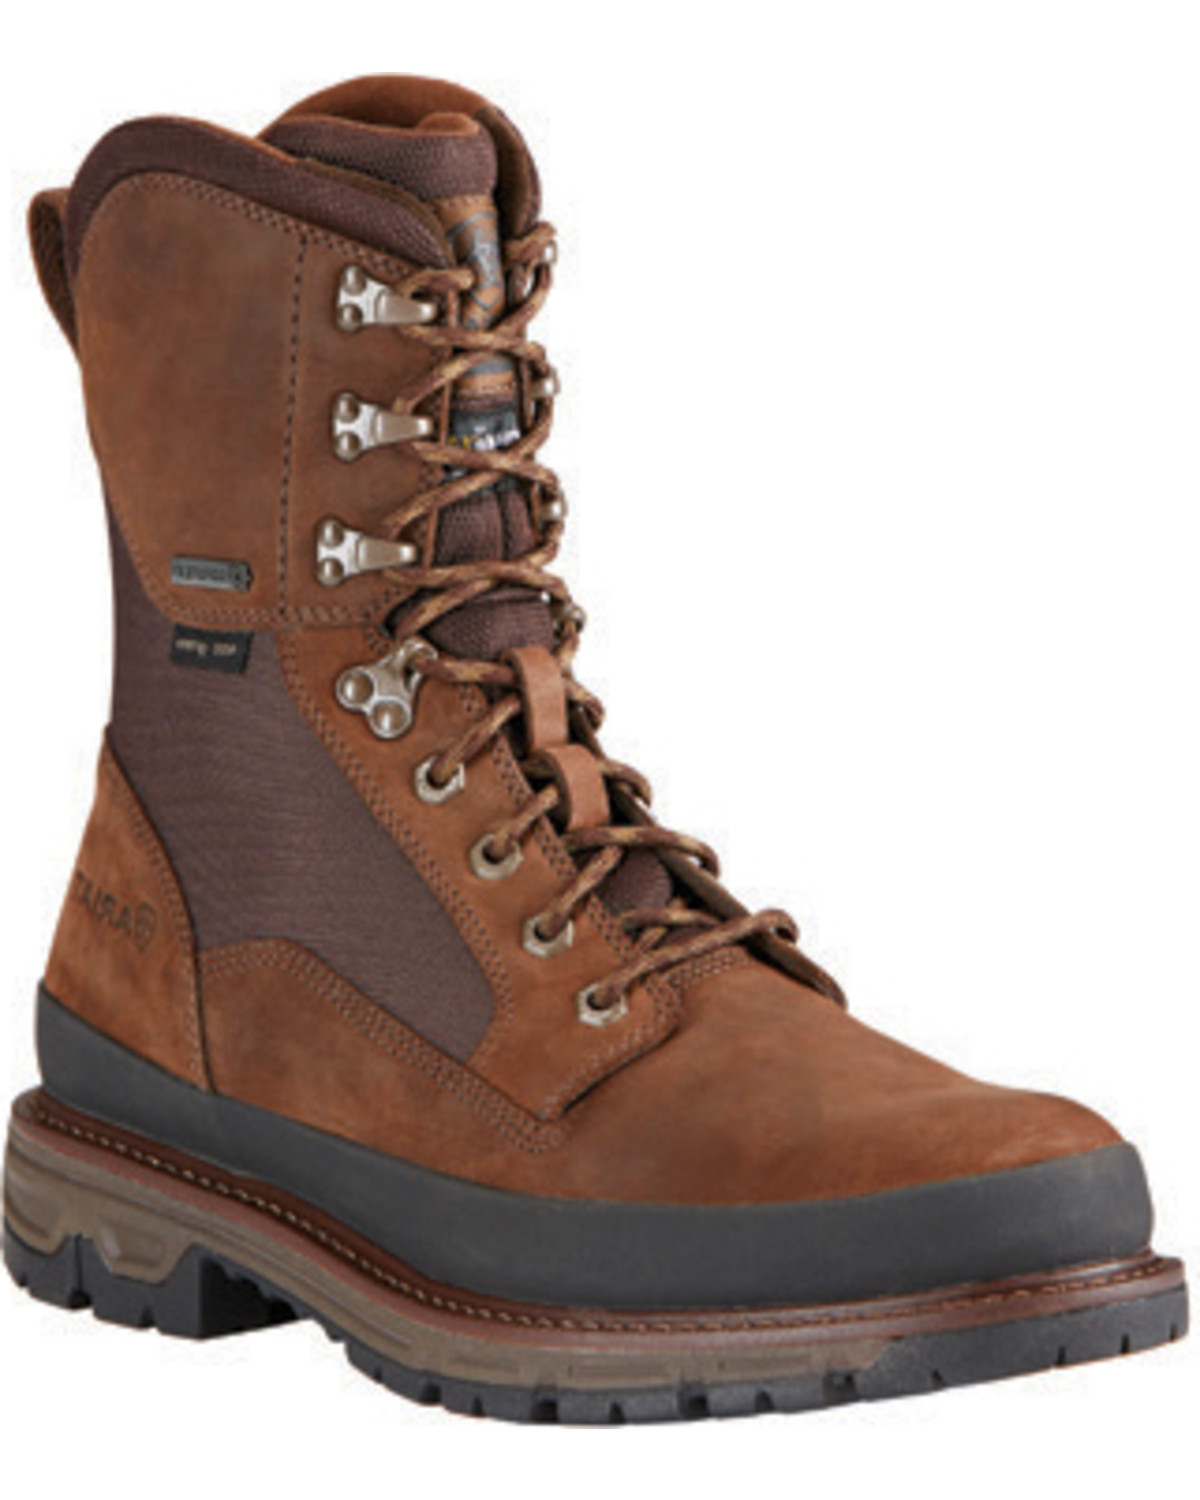 Ariat Men's Insulated Conquest Waterproof Hunting Boots | Boot Barn